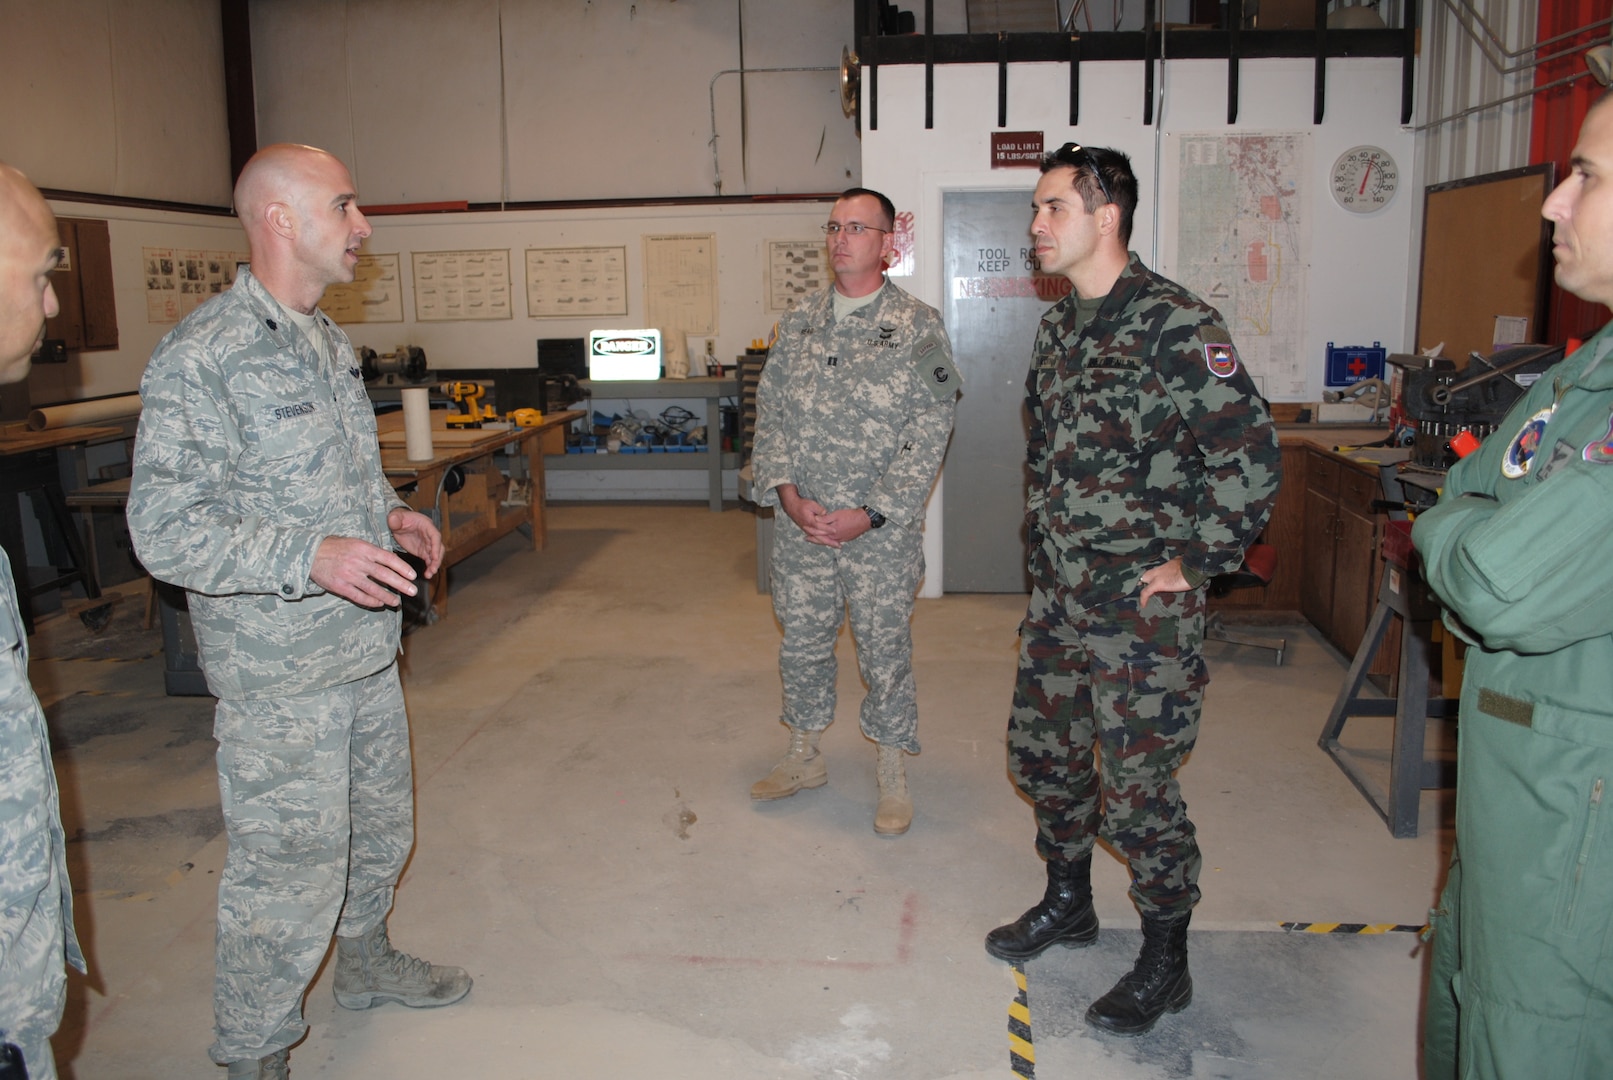 Lt. Col. John Stevenson, 140th Operation Support Squadron Airburst Range commander (left center) Stevens, Capt. Perry Read (center) and Slovenian armed Forces Sgt. 1st Class Darko Roth (right center) discuss training range management and how the Colorado Airmen manufacture their own training assets, such as targets, during a State Partnership Program visit to the 140th Operations Squadron's Airburst Range at Fort Carson, Colo., Oct. 31, 2012. The CONG and the Republic of Slovenia have been partner nations since 1993, when the program began. In addition to many other milestones in the program, Citizen-Soldiers from the CONG and soldiers from Slovenia have deployed together many times as members of the Operational Mentor Liaison Teams, now called Military Assistance Teams, to help train soldiers of the Afghan National Army. (Official Army National Guard photo by Officer Candidate Jennings Catlett/RELEASED)